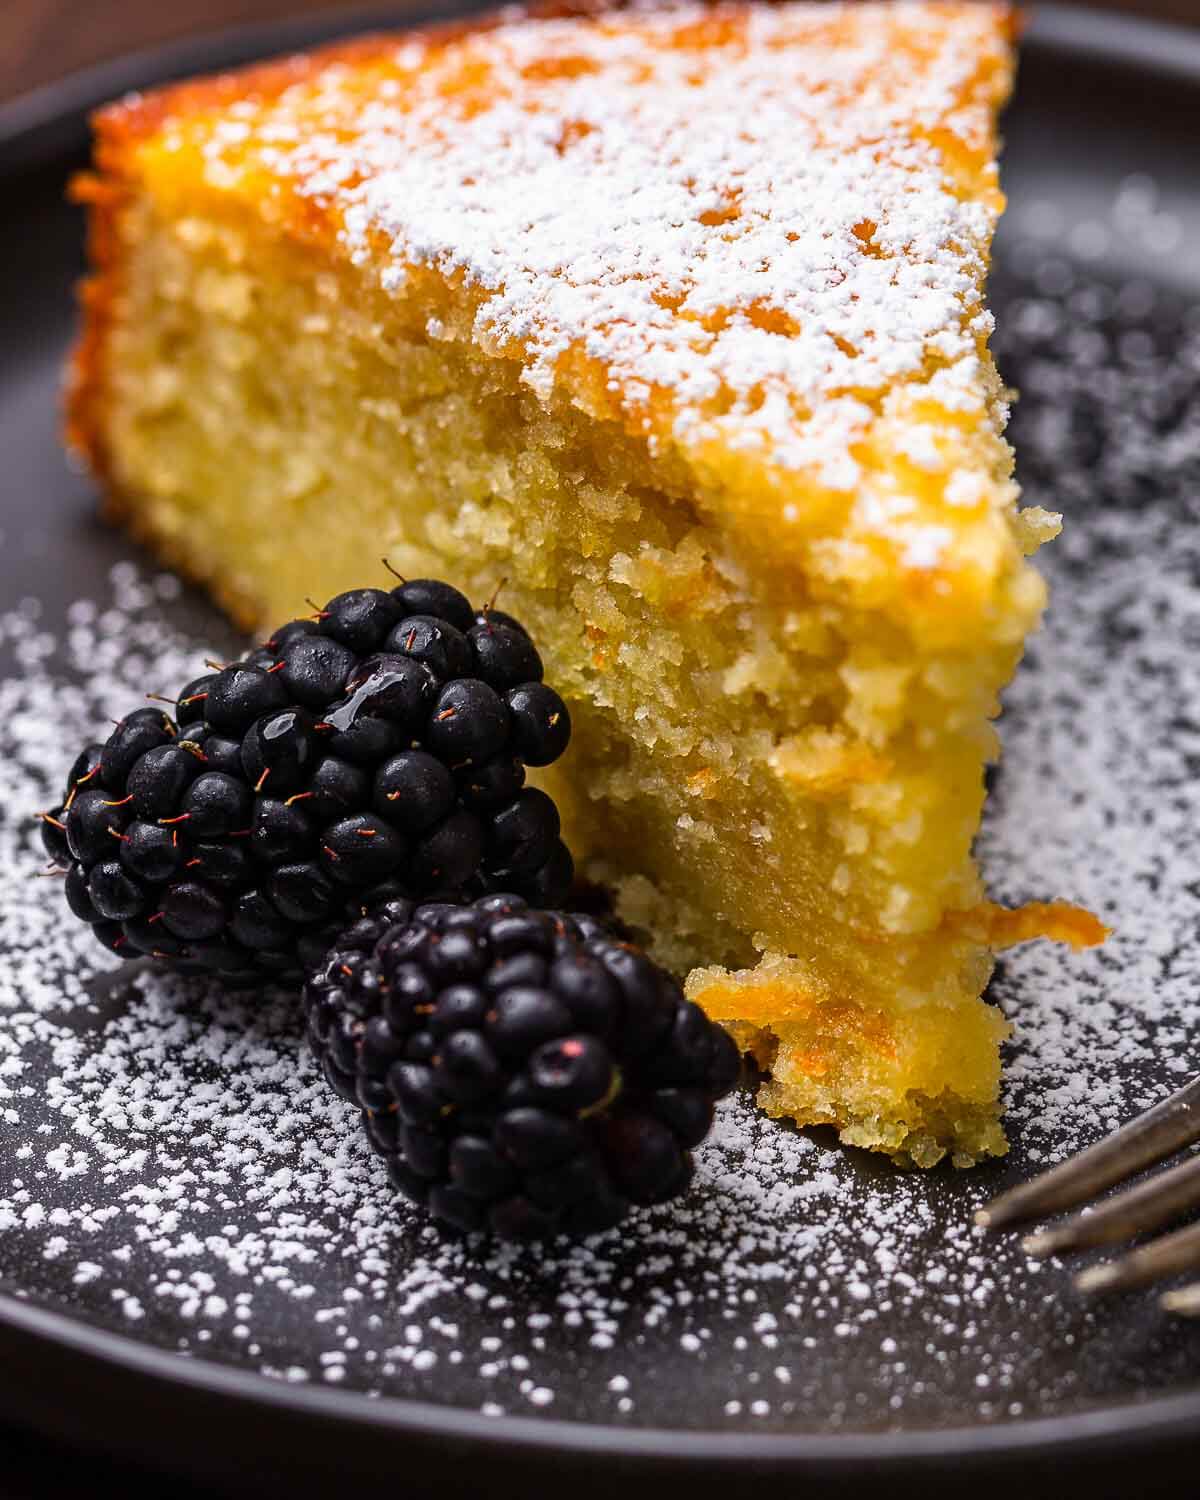 Piece of orange olive cake in plate with powdered sugar and blackberries.